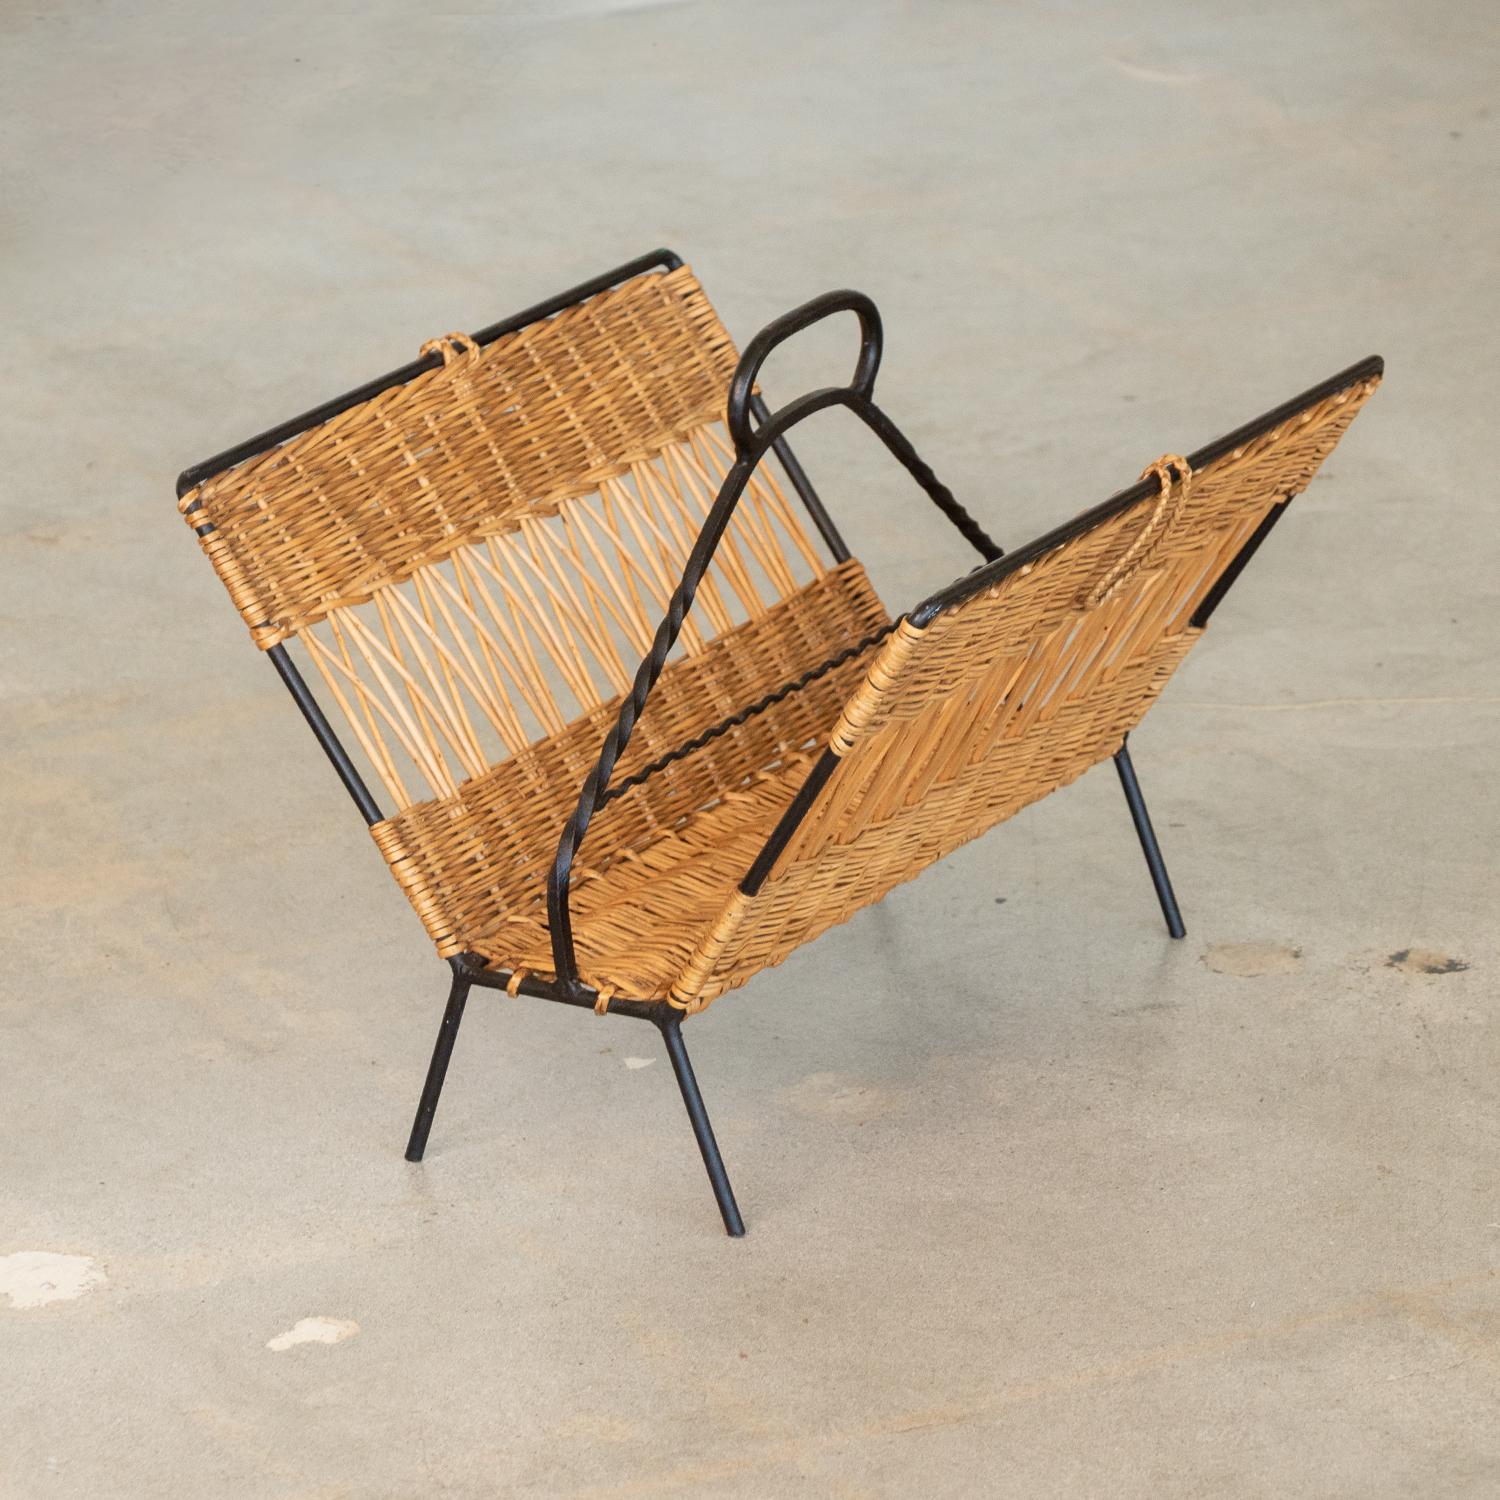 Beautiful wicker and iron magazine rack from France, 1950s. Twisted iron handle detail and original woven wicker sides. Nice age and patina throughout.